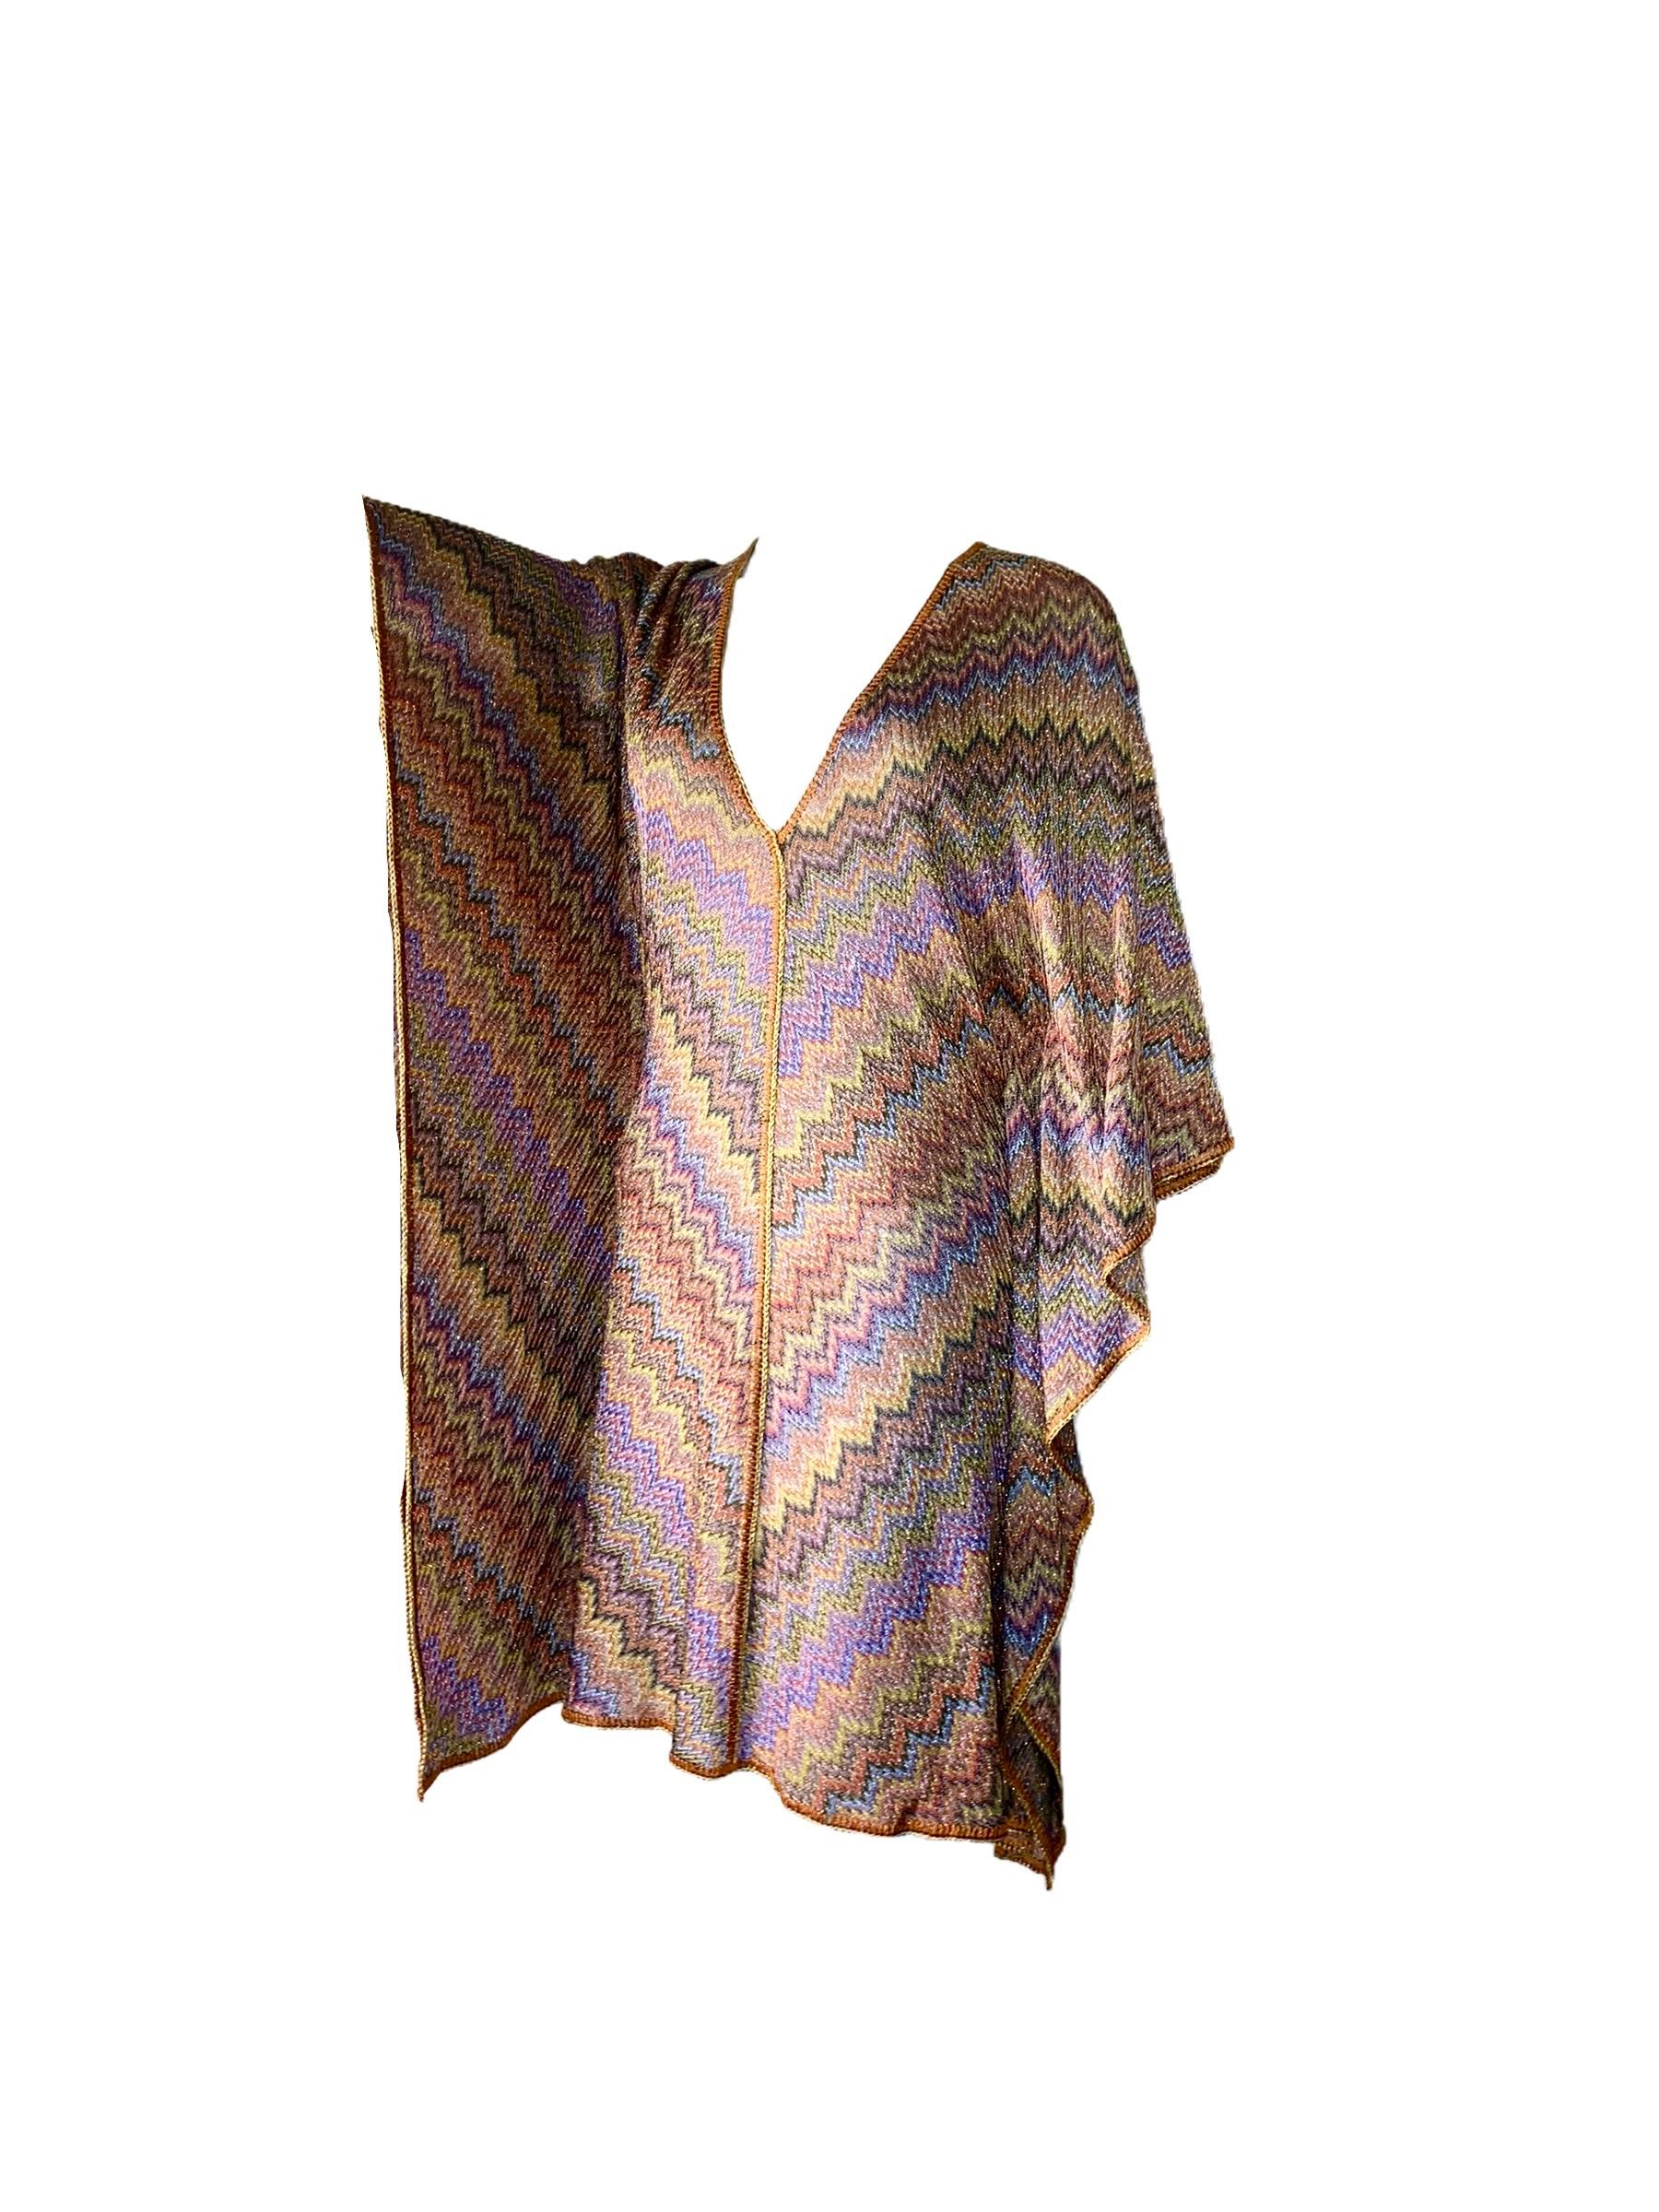     Beautiful multicolored lurex Missoni kaftan dress
    Classic Missoni signature knit
    Simply slips on
    Deep V-Neck
    Crochet-knit detail trimming
  Dry Clean only
    Made in Italy
Size 42


